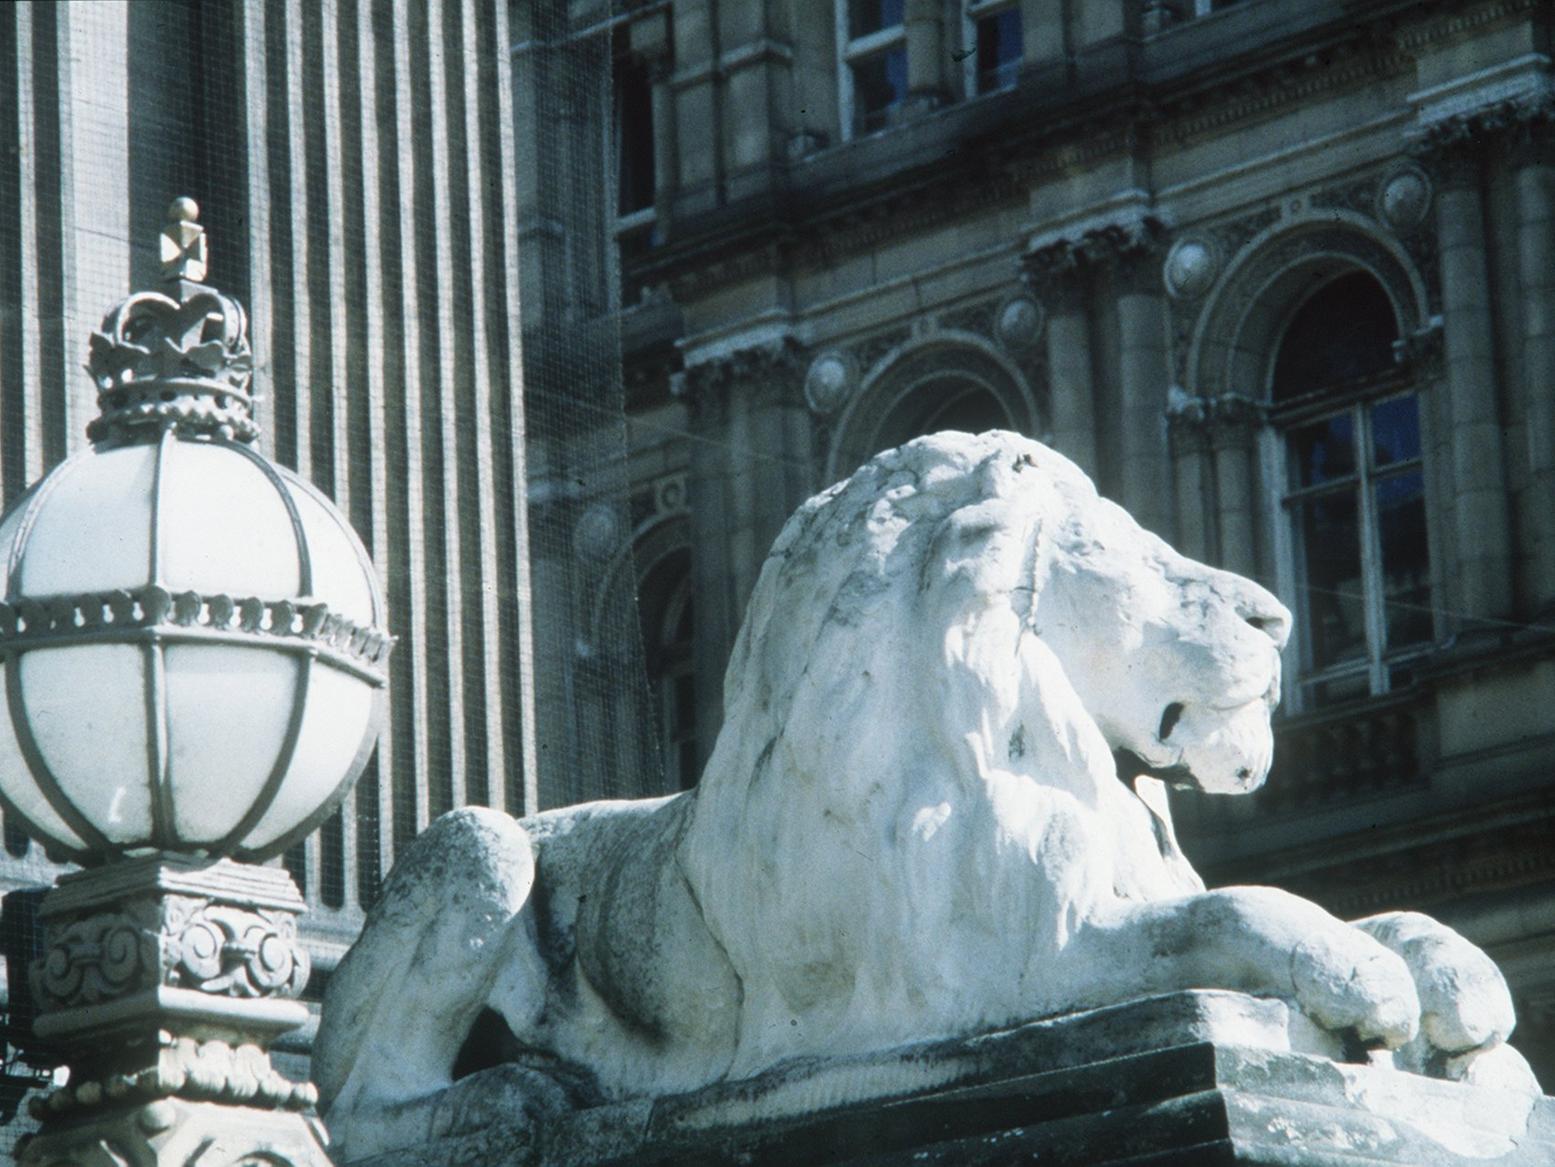 In 1921, Lt Col Kitson Clark had some harsh words for the Leeds Town Hall lions, describing them as extraordinarily poor, mawkish and miserable looking. The lions were carved by William Day Kayworth Jnr at a cost of 550.